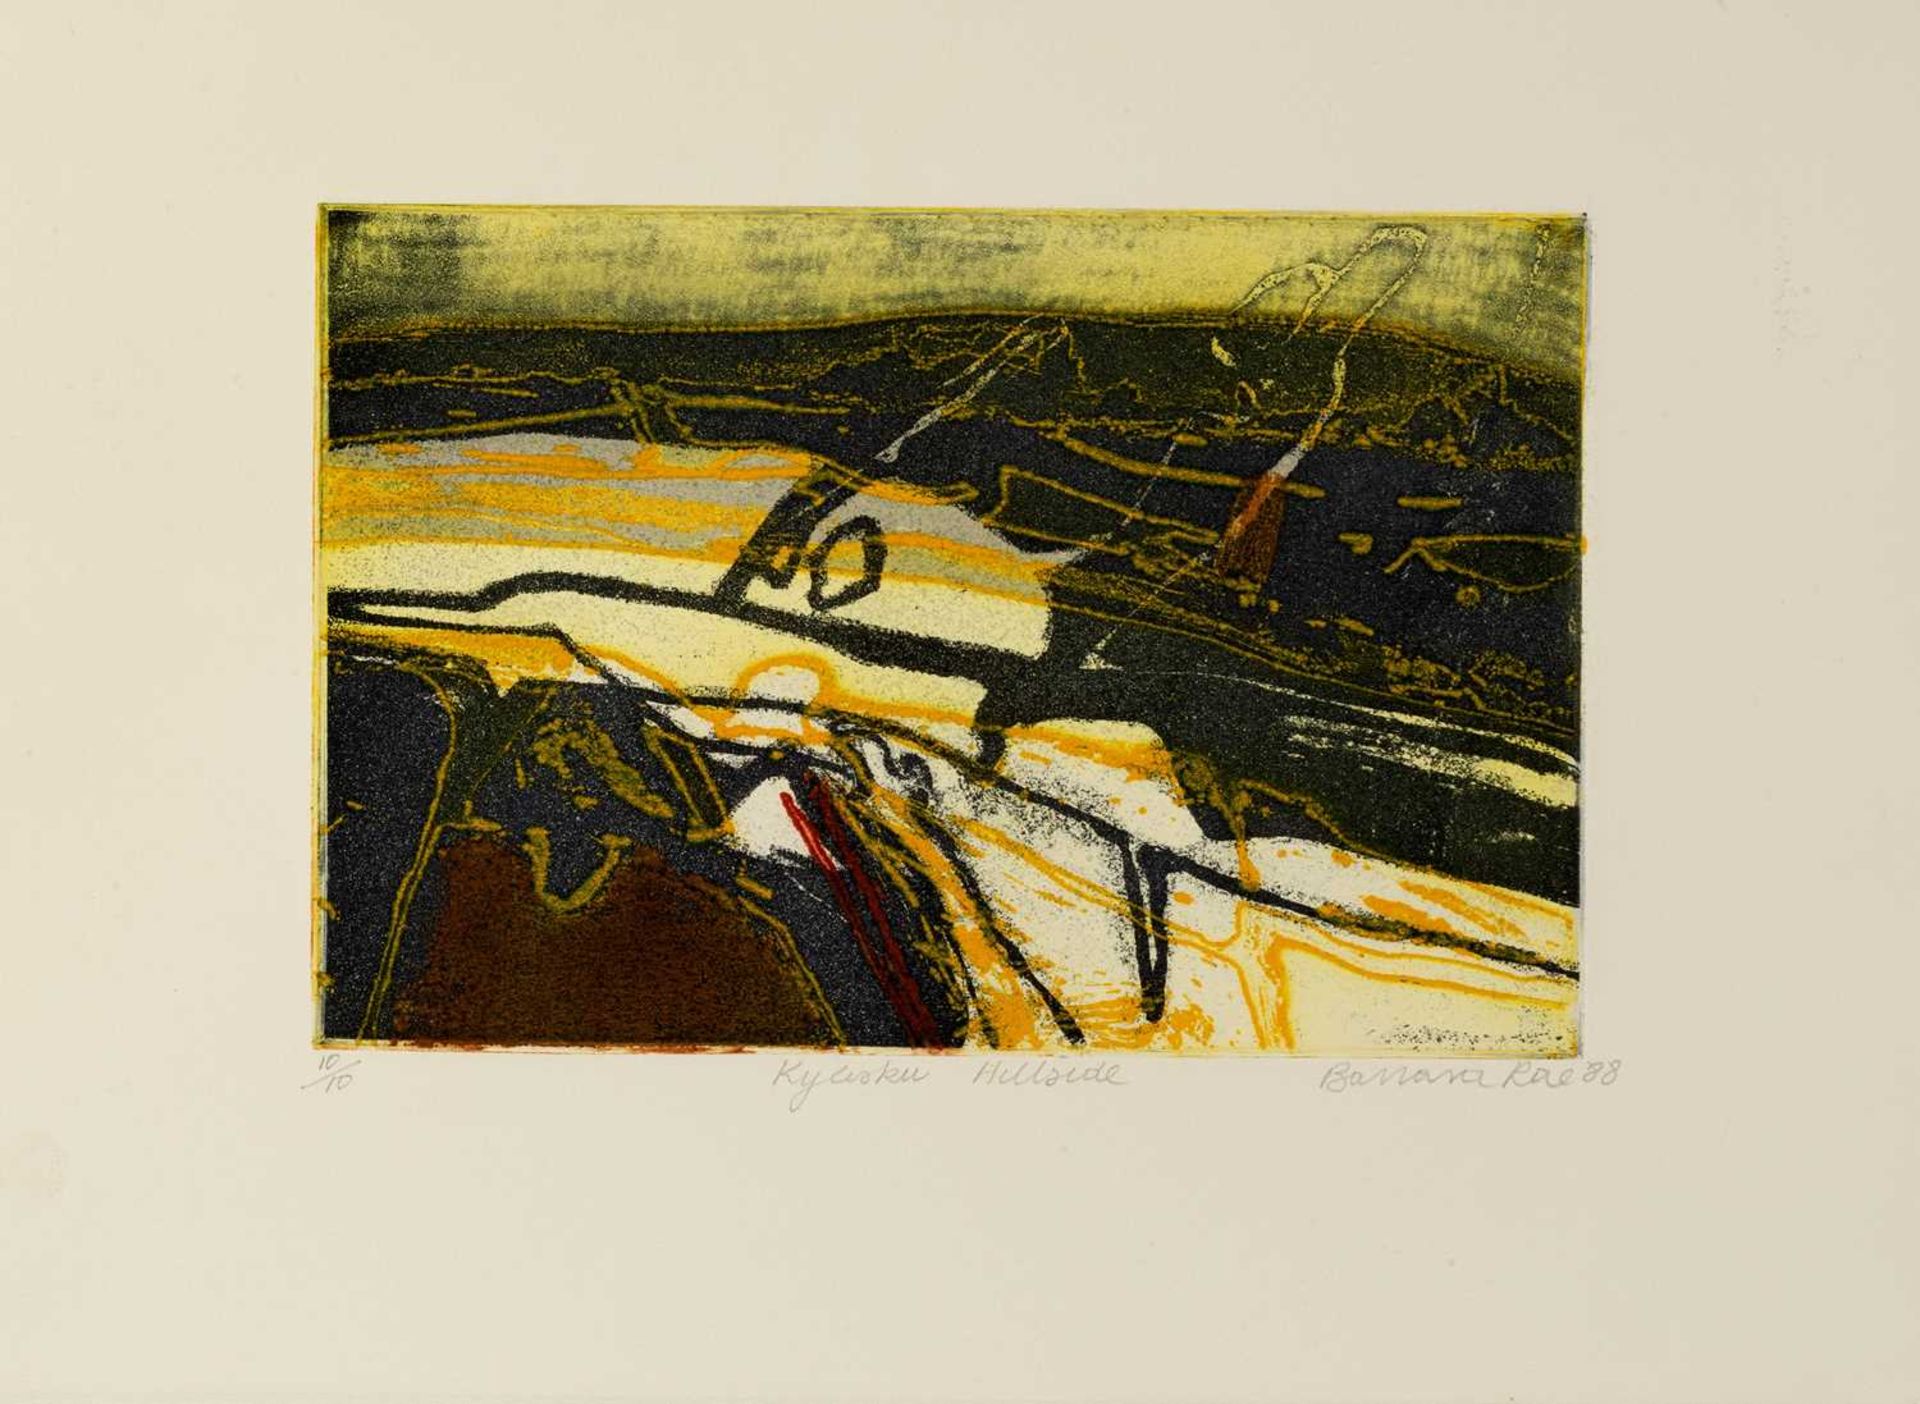 Barbara Rae (b.1943) Hillside, 1988 10/10, signed, numbered, dated, and titled in pencil (in the - Image 2 of 2